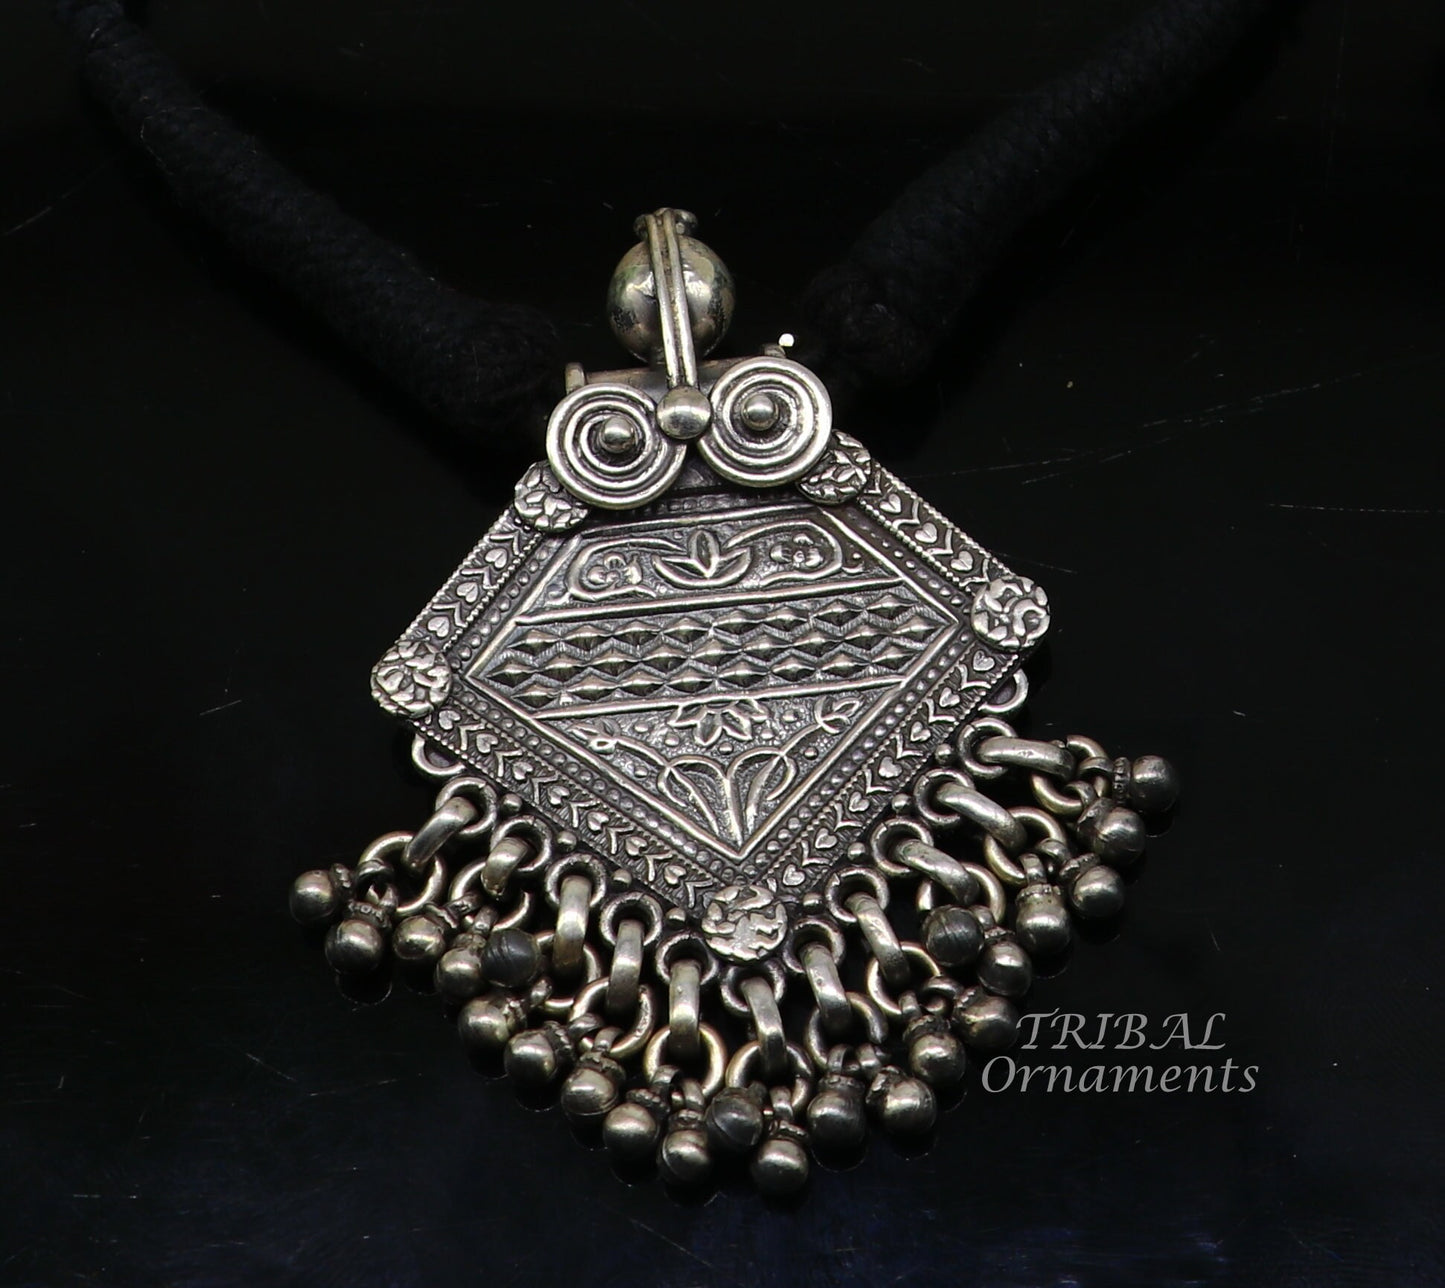 925 sterling silver handmade vintage ethnic style fabulous unique design pendant necklace best belly dance ethnic garba jewelry nsp507 - TRIBAL ORNAMENTS